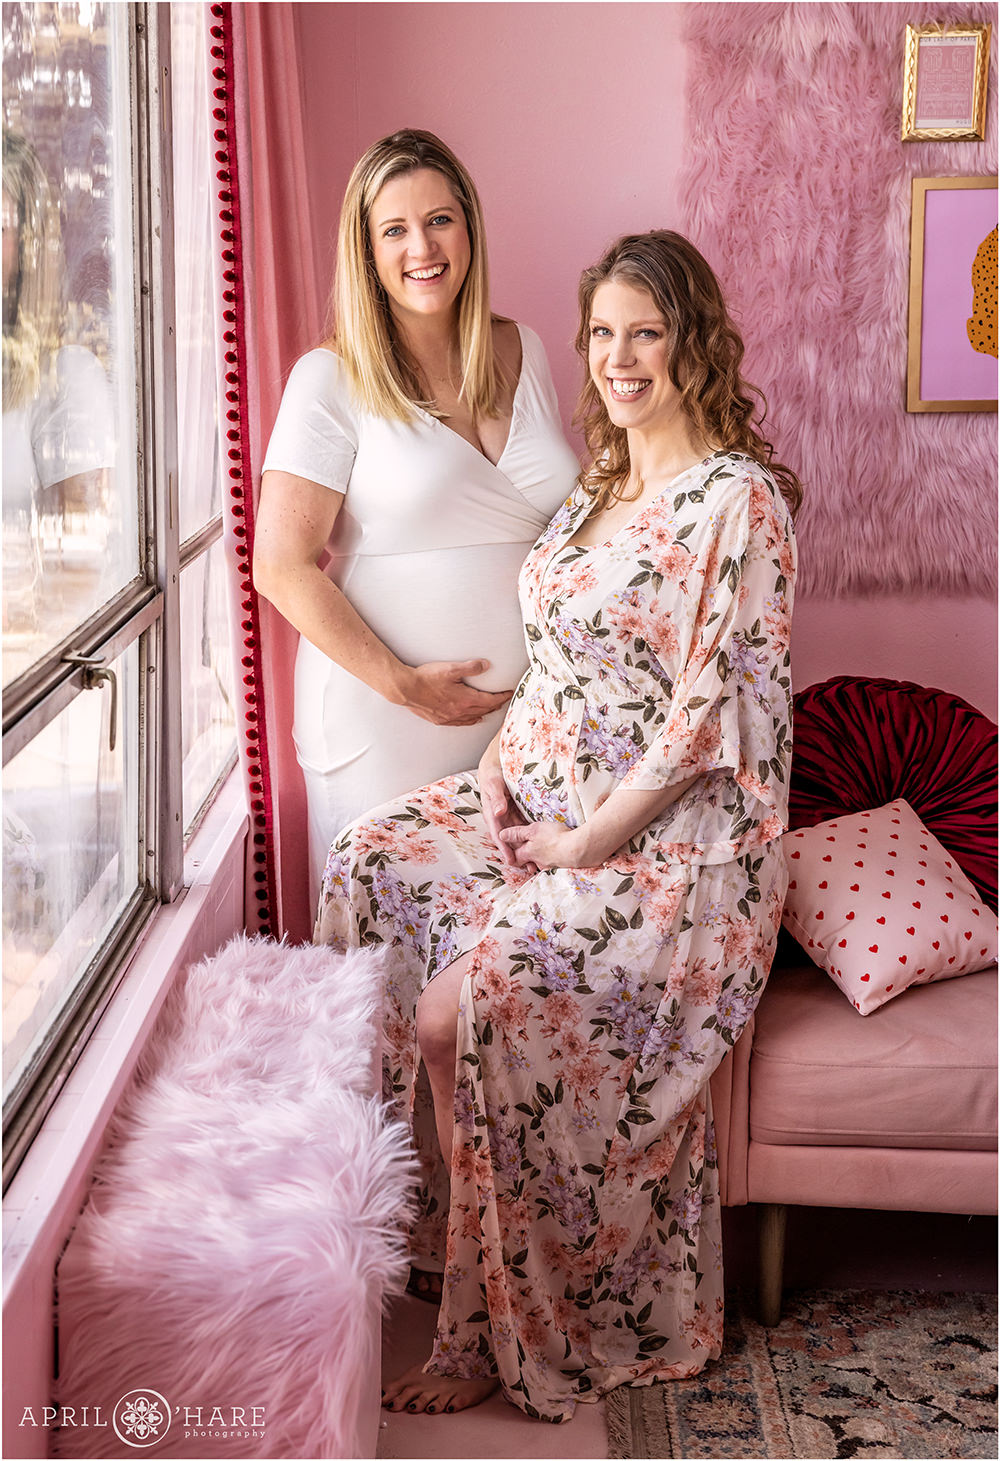 Two sisters pose for a portrait together at their maternity session at a pretty pink Valentine's Day styled indoor studio set in Denver